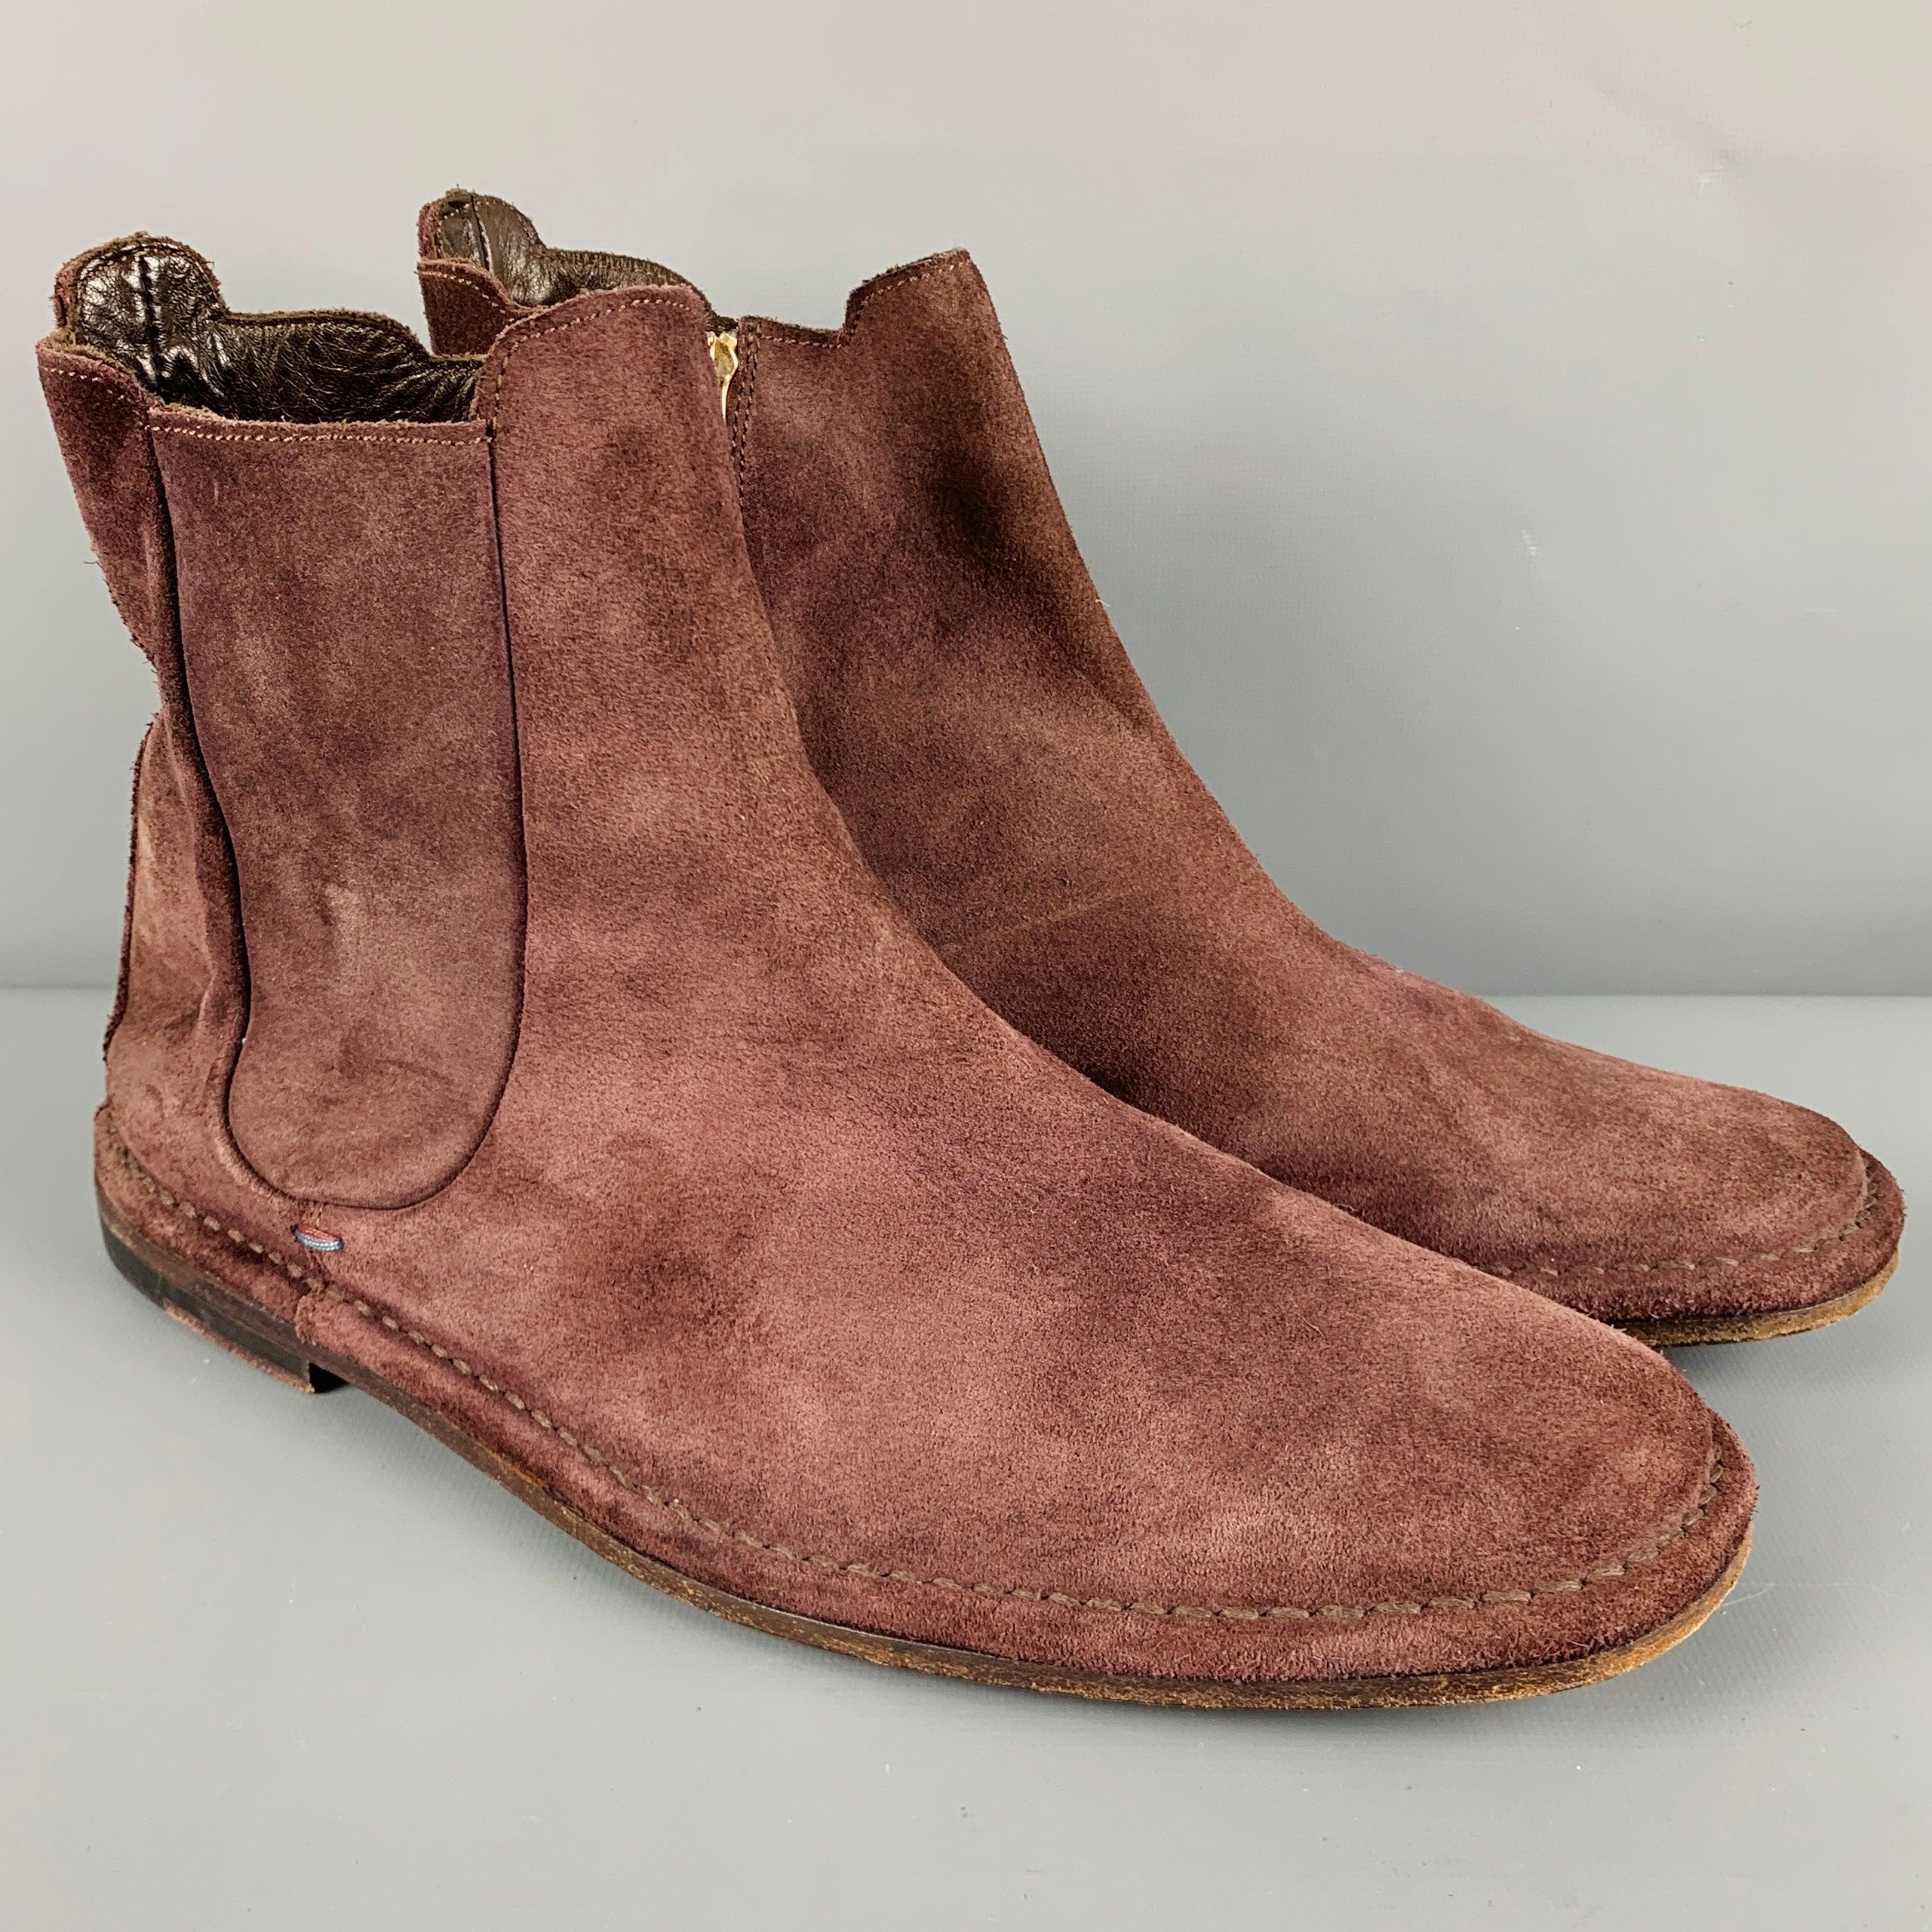 PAUL SMITH
boots in a purple suede fabric featuring an ankle style, wooden sole, and side zipper closure. Made in Italy.Very Good Pre-Owned Condition. Moderate signs of wear. 

Marked:   9 

Measurements: 
  Length: 12 inches Width: 4.25 inches